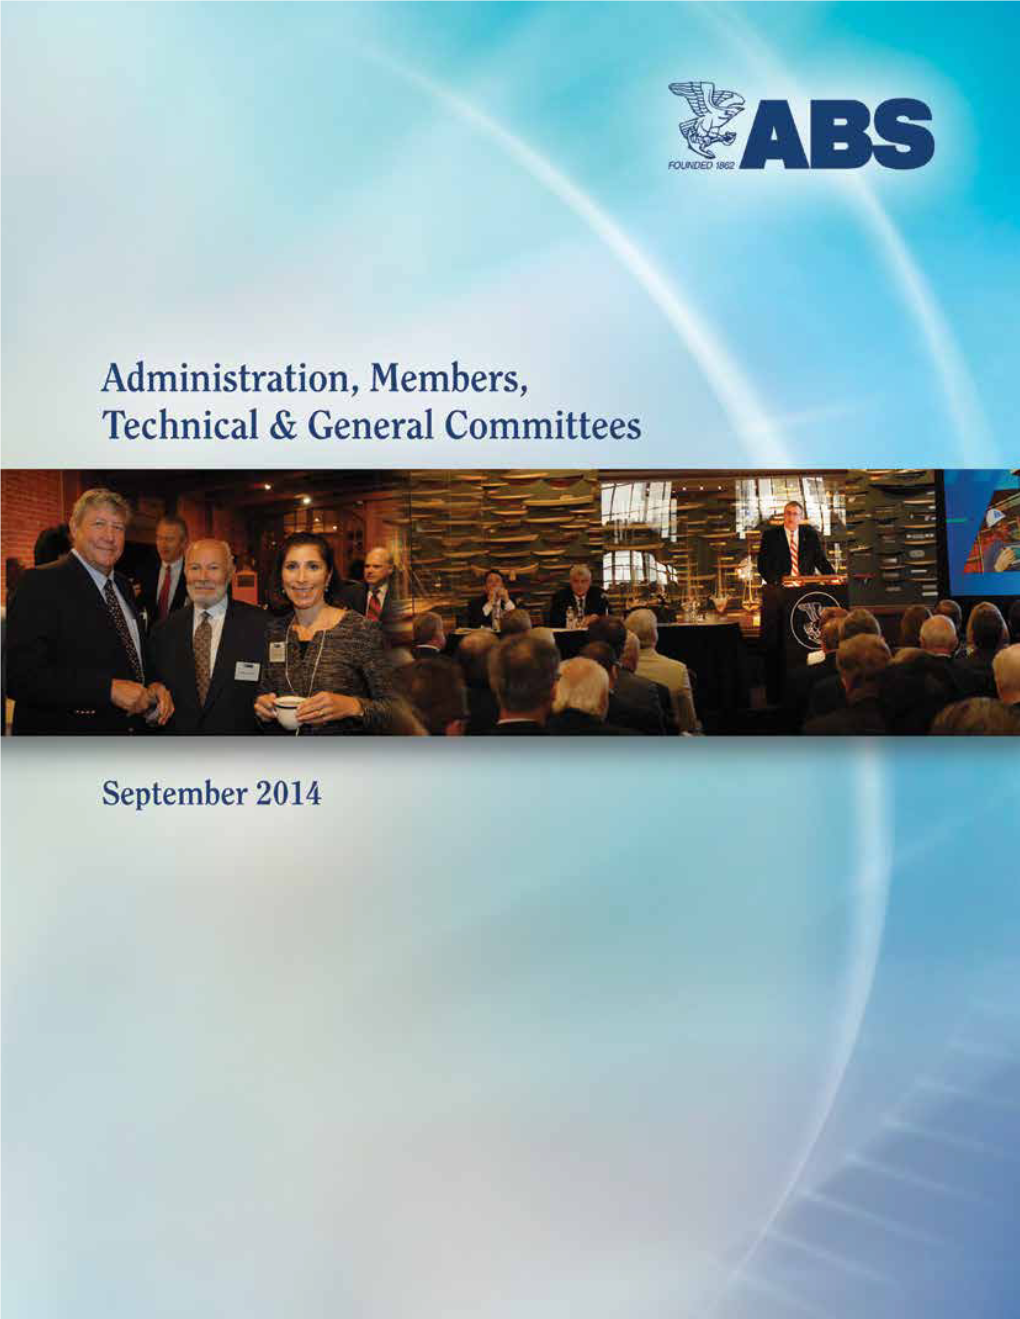 Administration, Members, Technical & General Committees